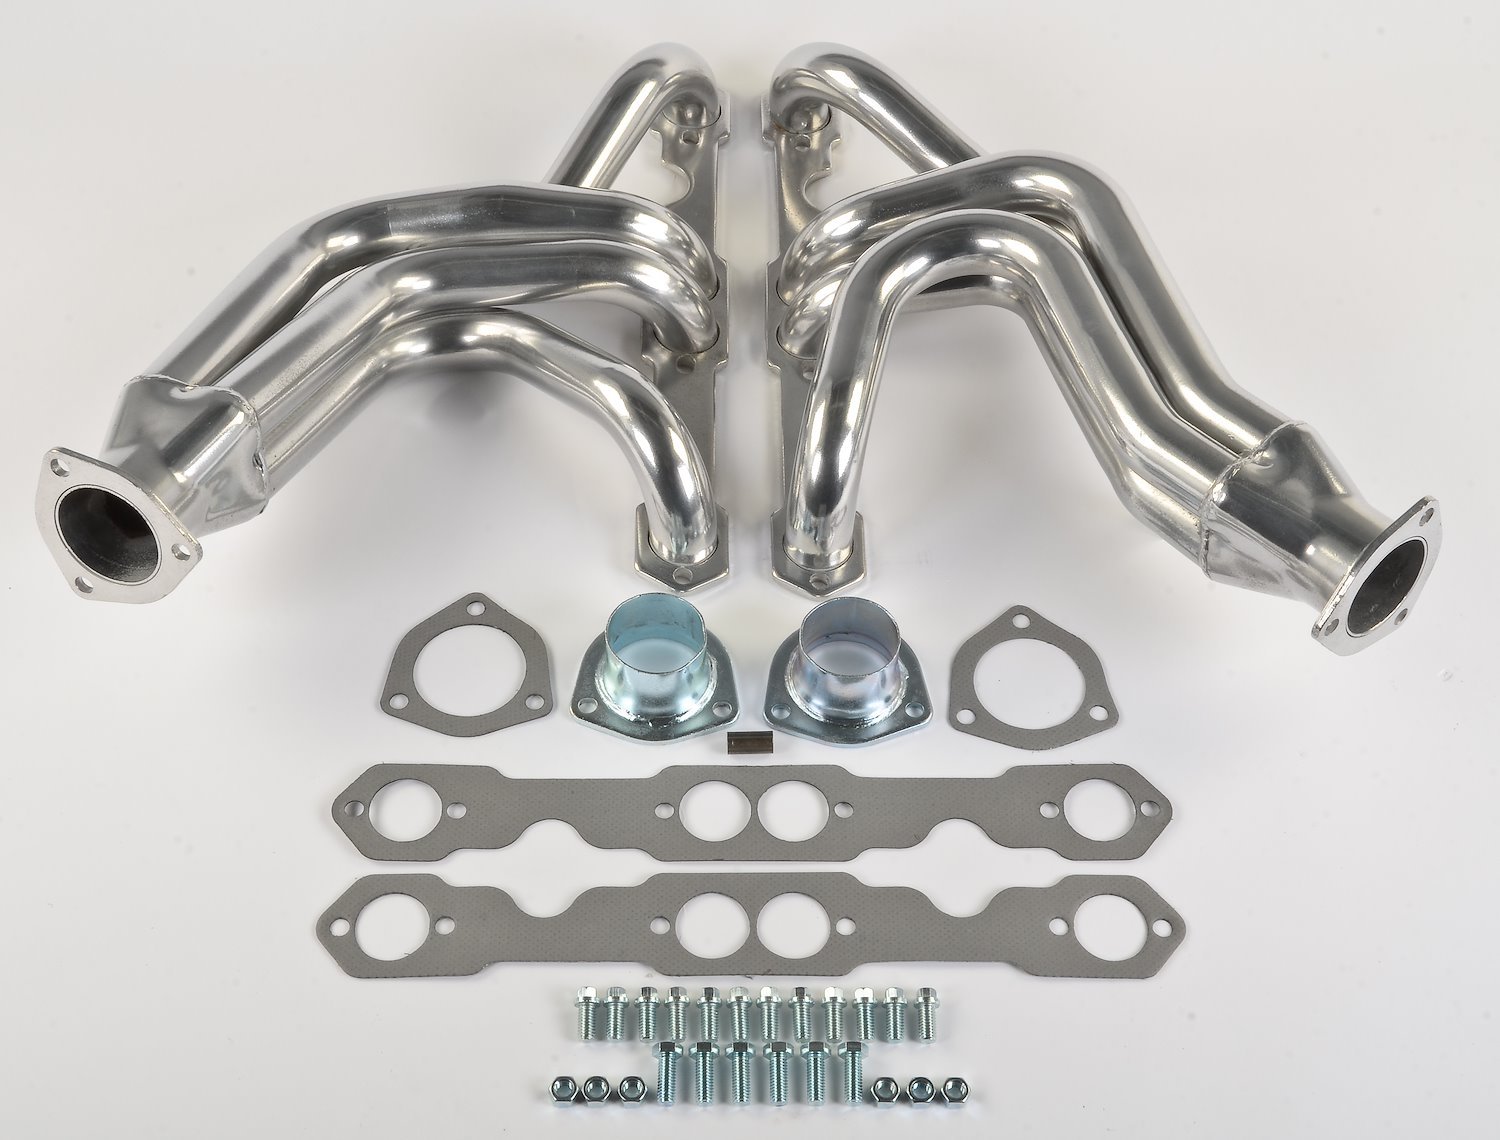 Metallic Ceramic Coated Shorty Style Headers for 1955-1982 Small Block Chevy Passenger Car [1-5/8 in. Primary Tubes]